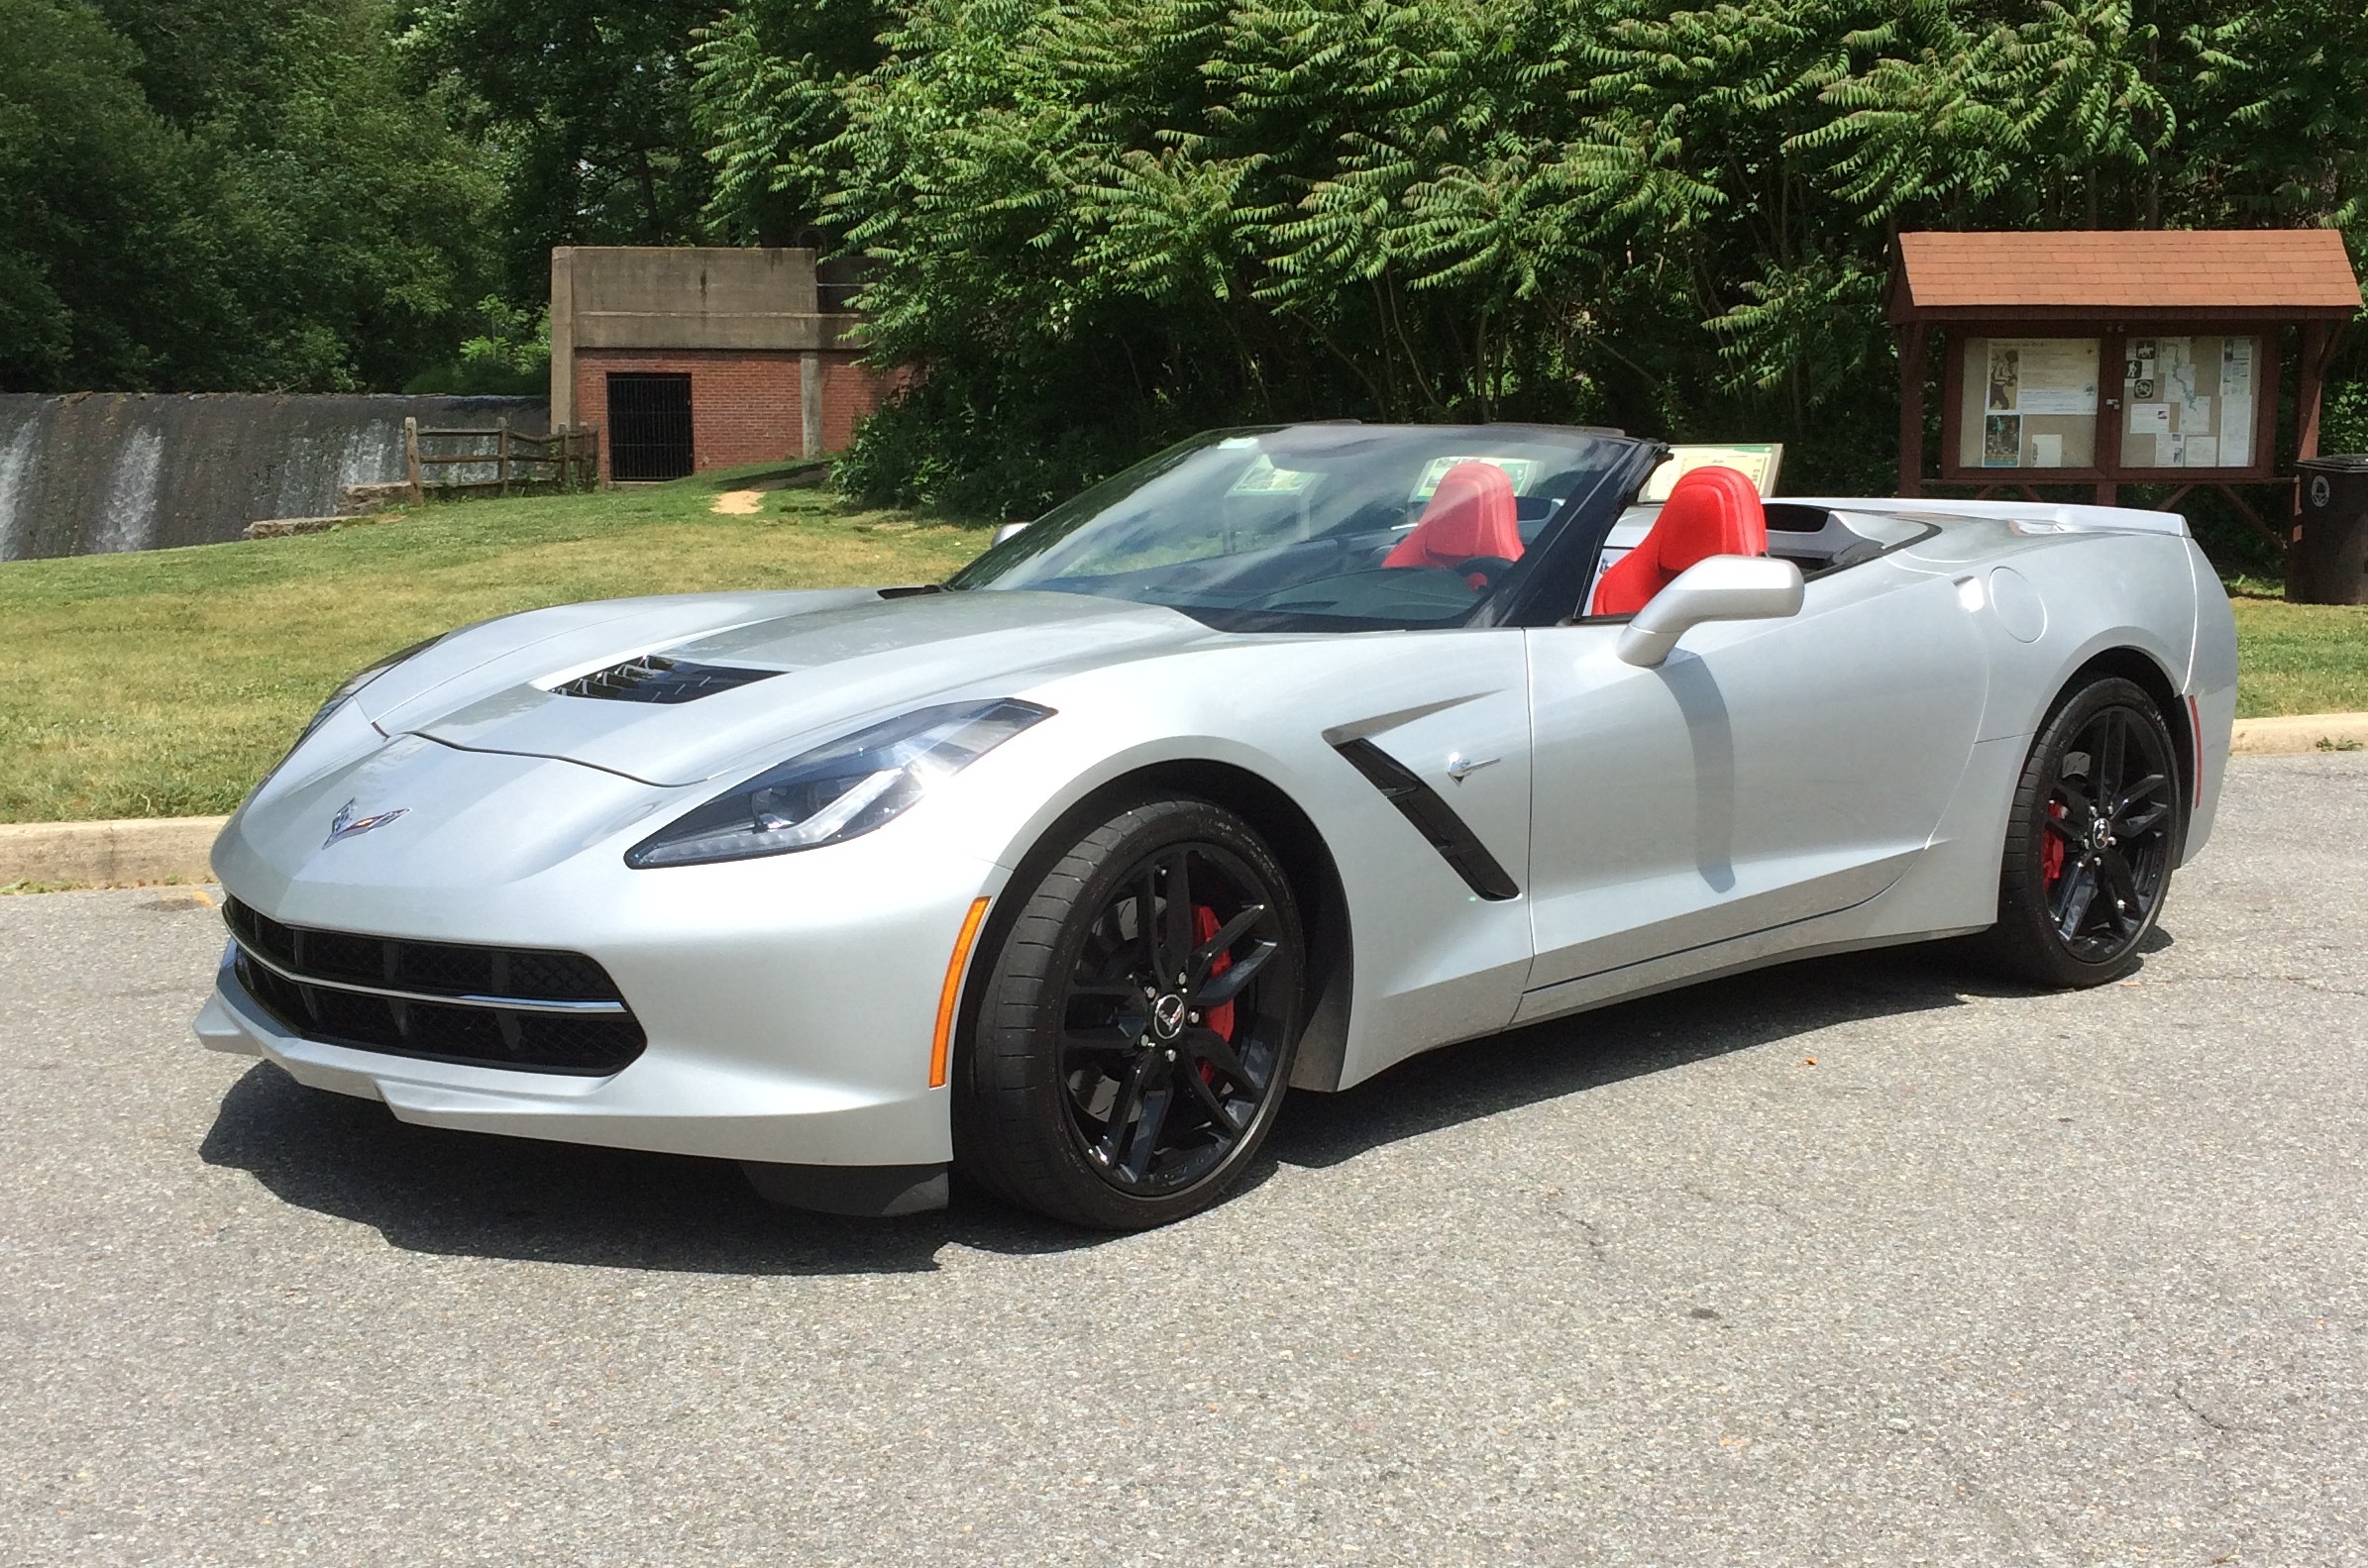 The 2015 Chevrolet Corvette Z51 convertible plays hard, cruises relaxed